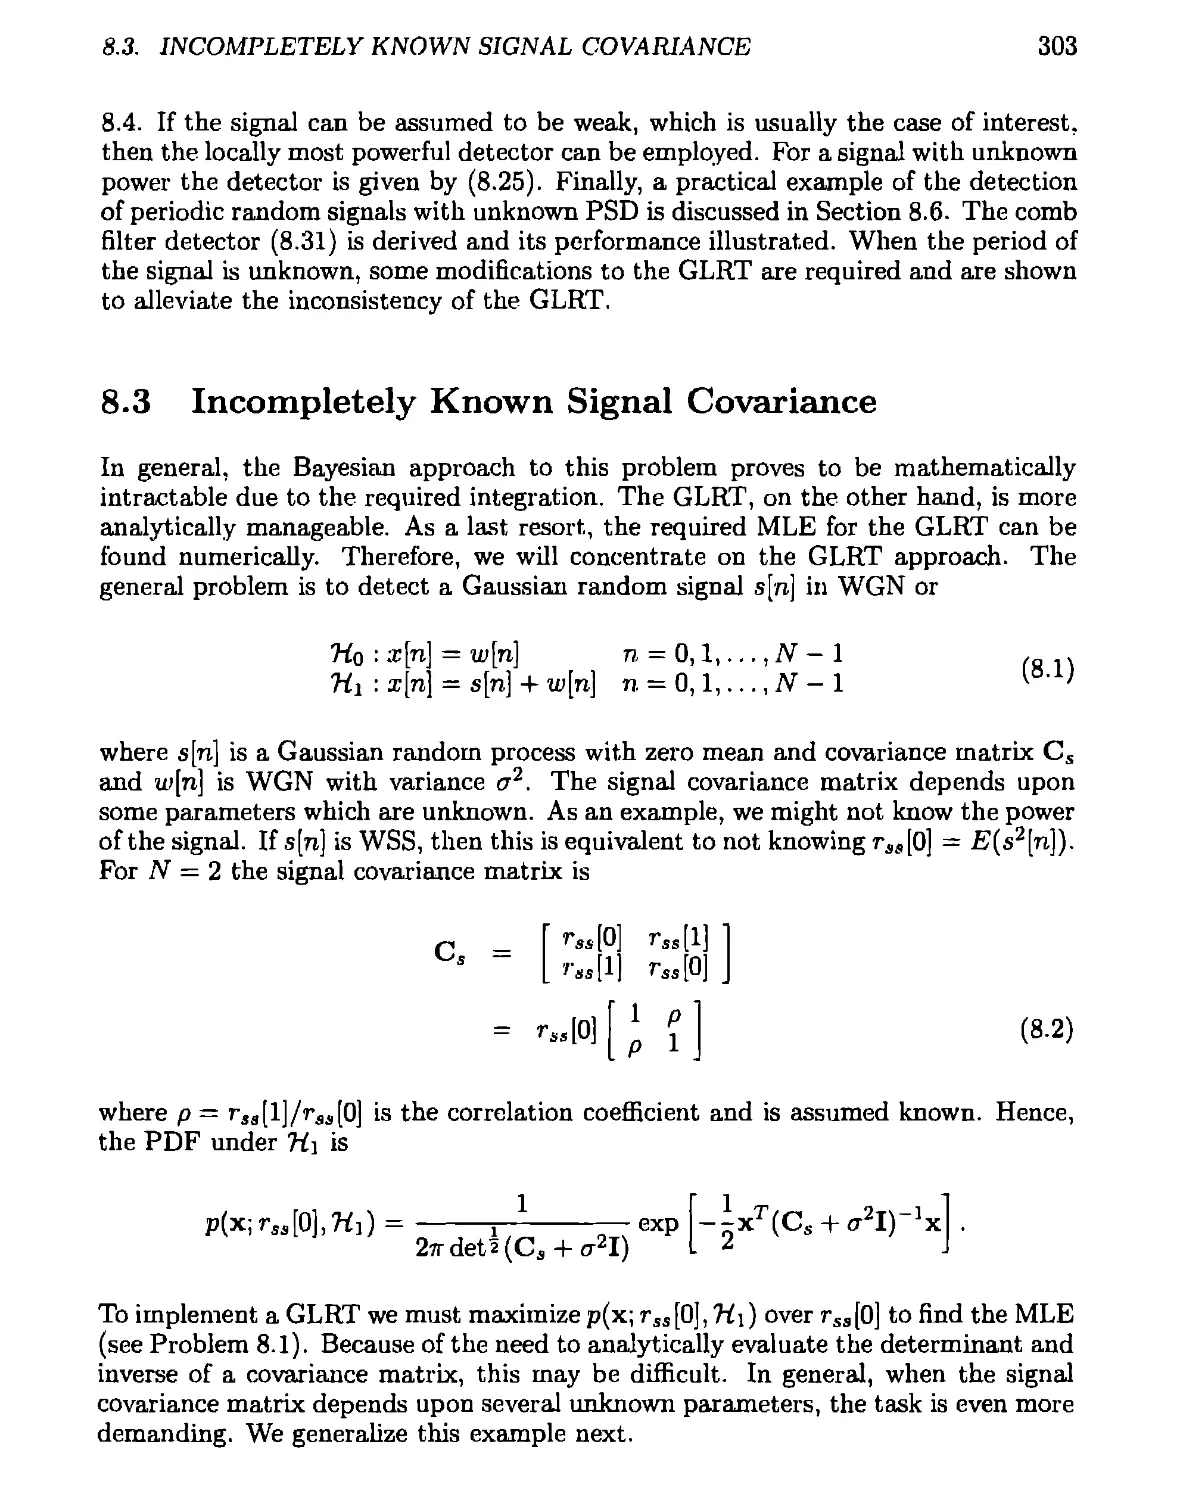 8.3 Incompletely Known Signal Covariance